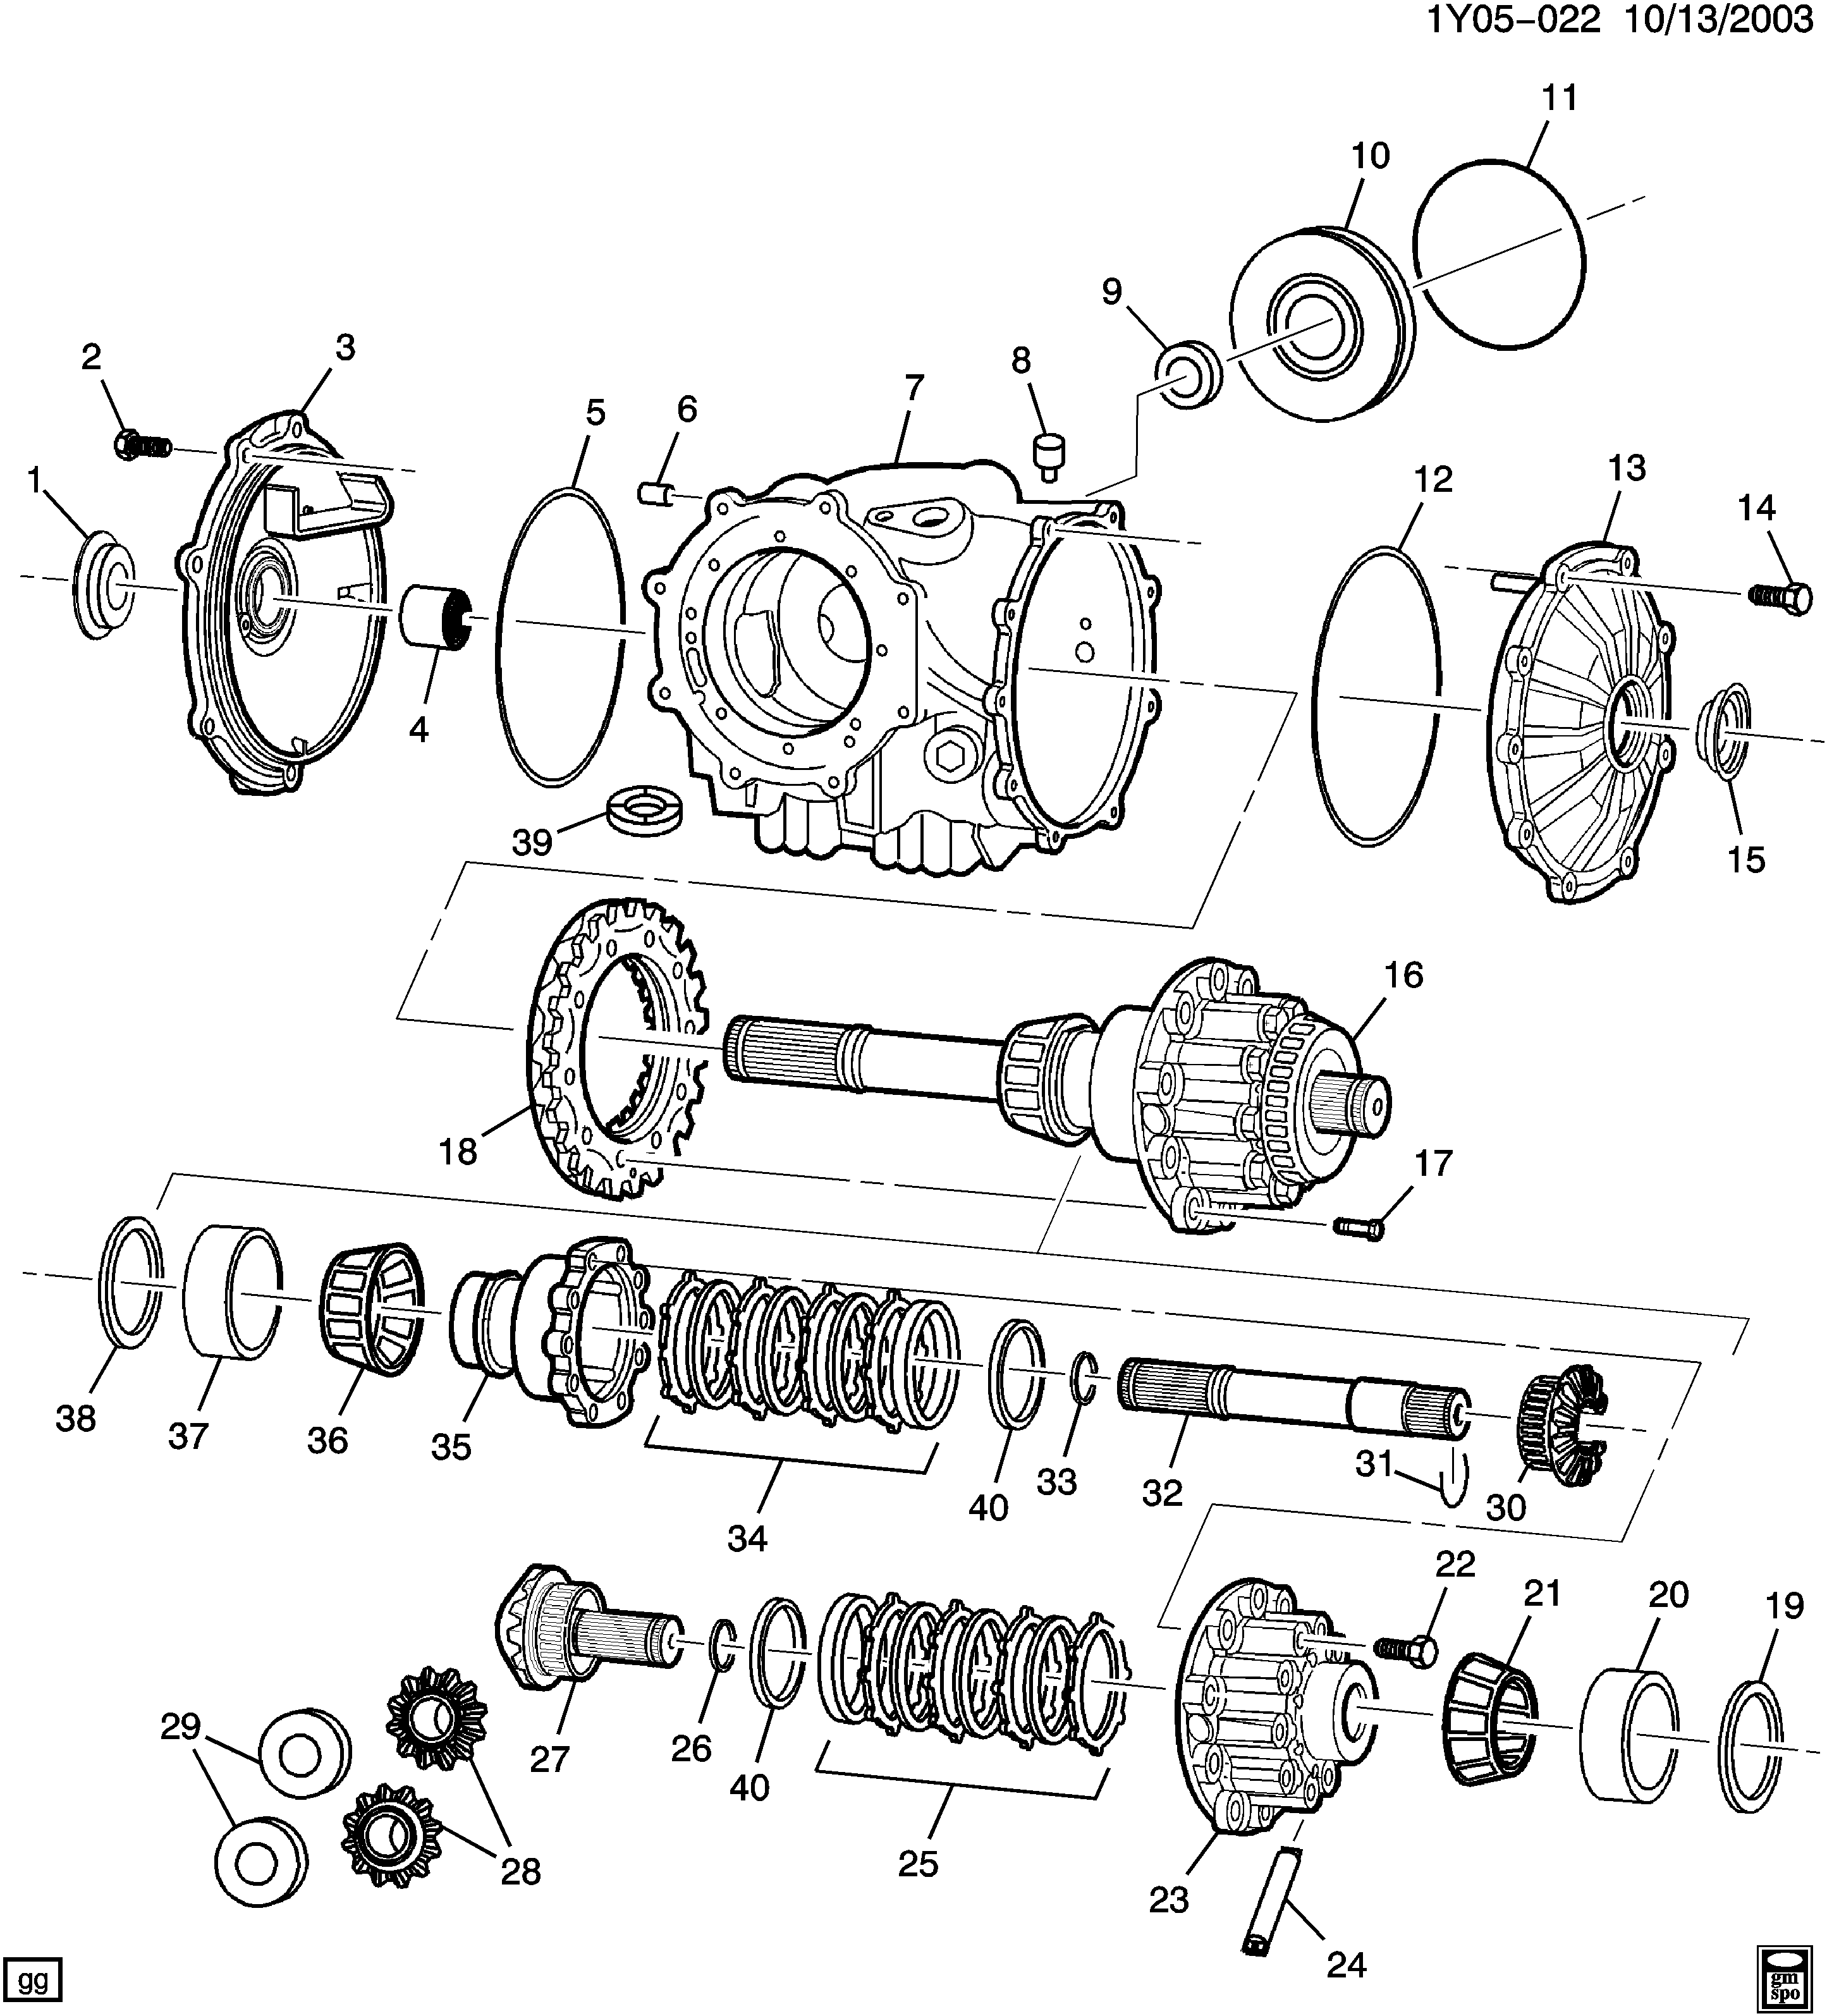 1997-2004 Y DIFFERENTIAL CARRIER PART 2 (SIDES)